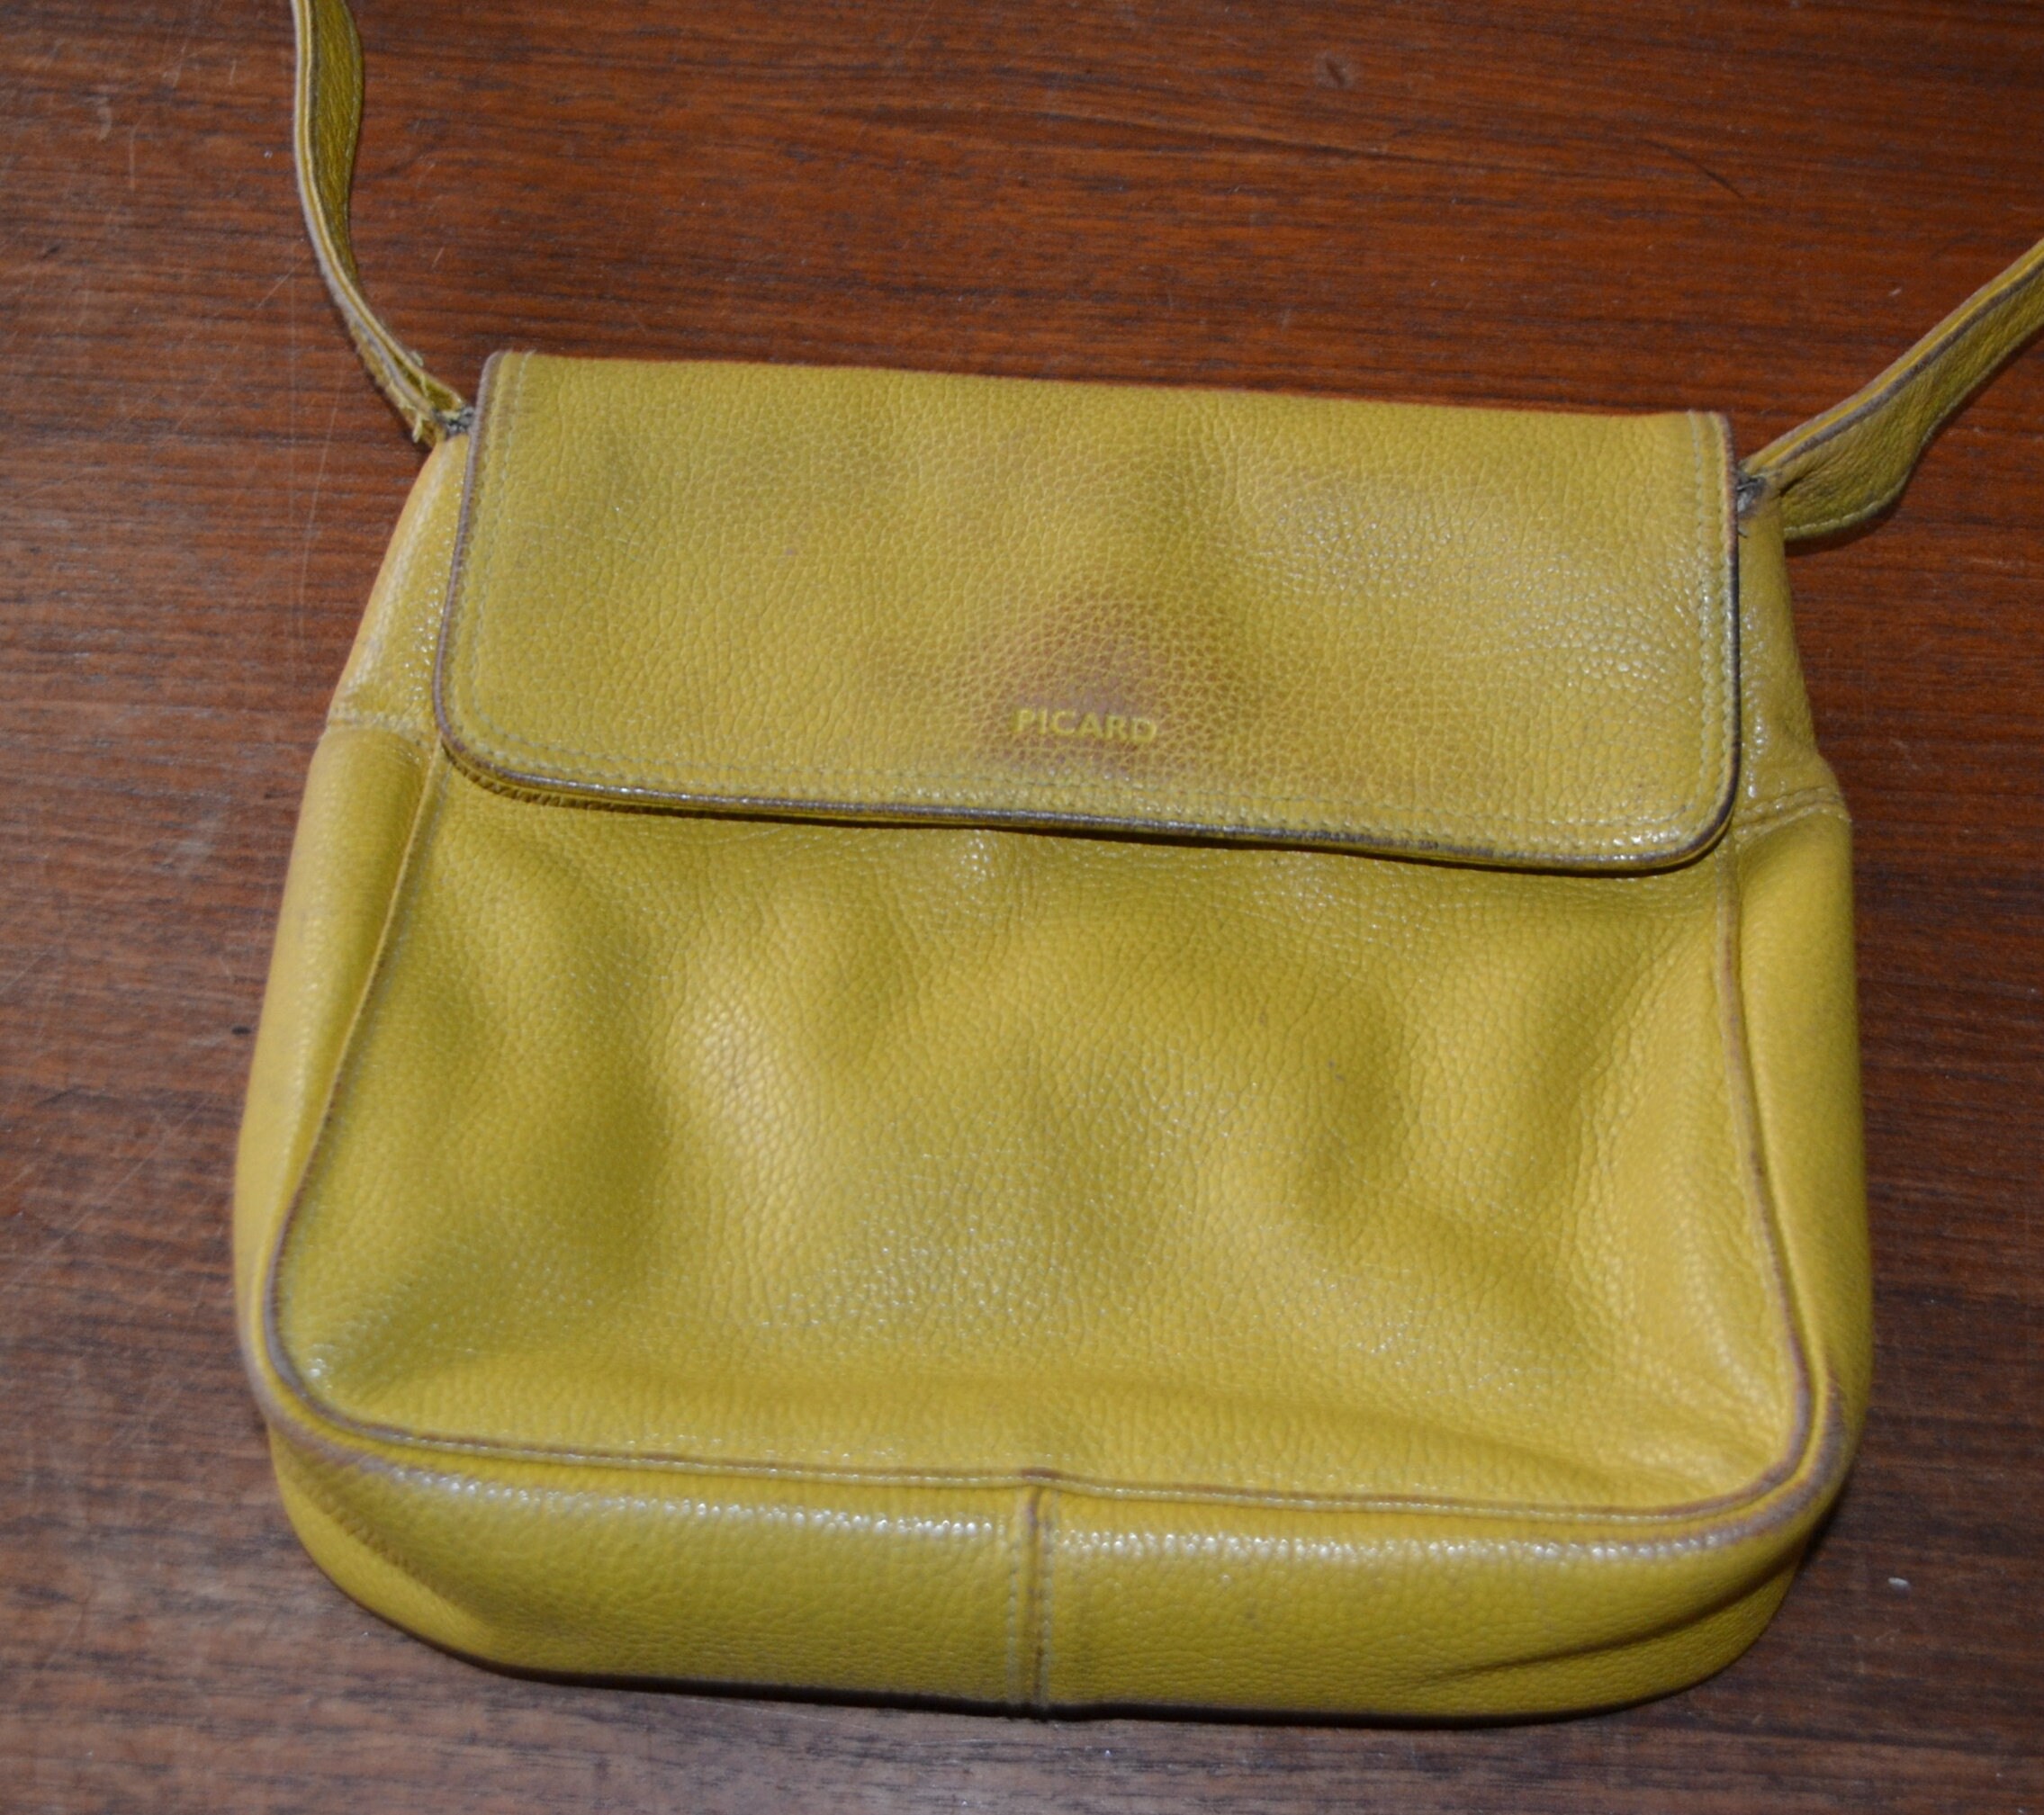 Vintage & second hand Picard bags